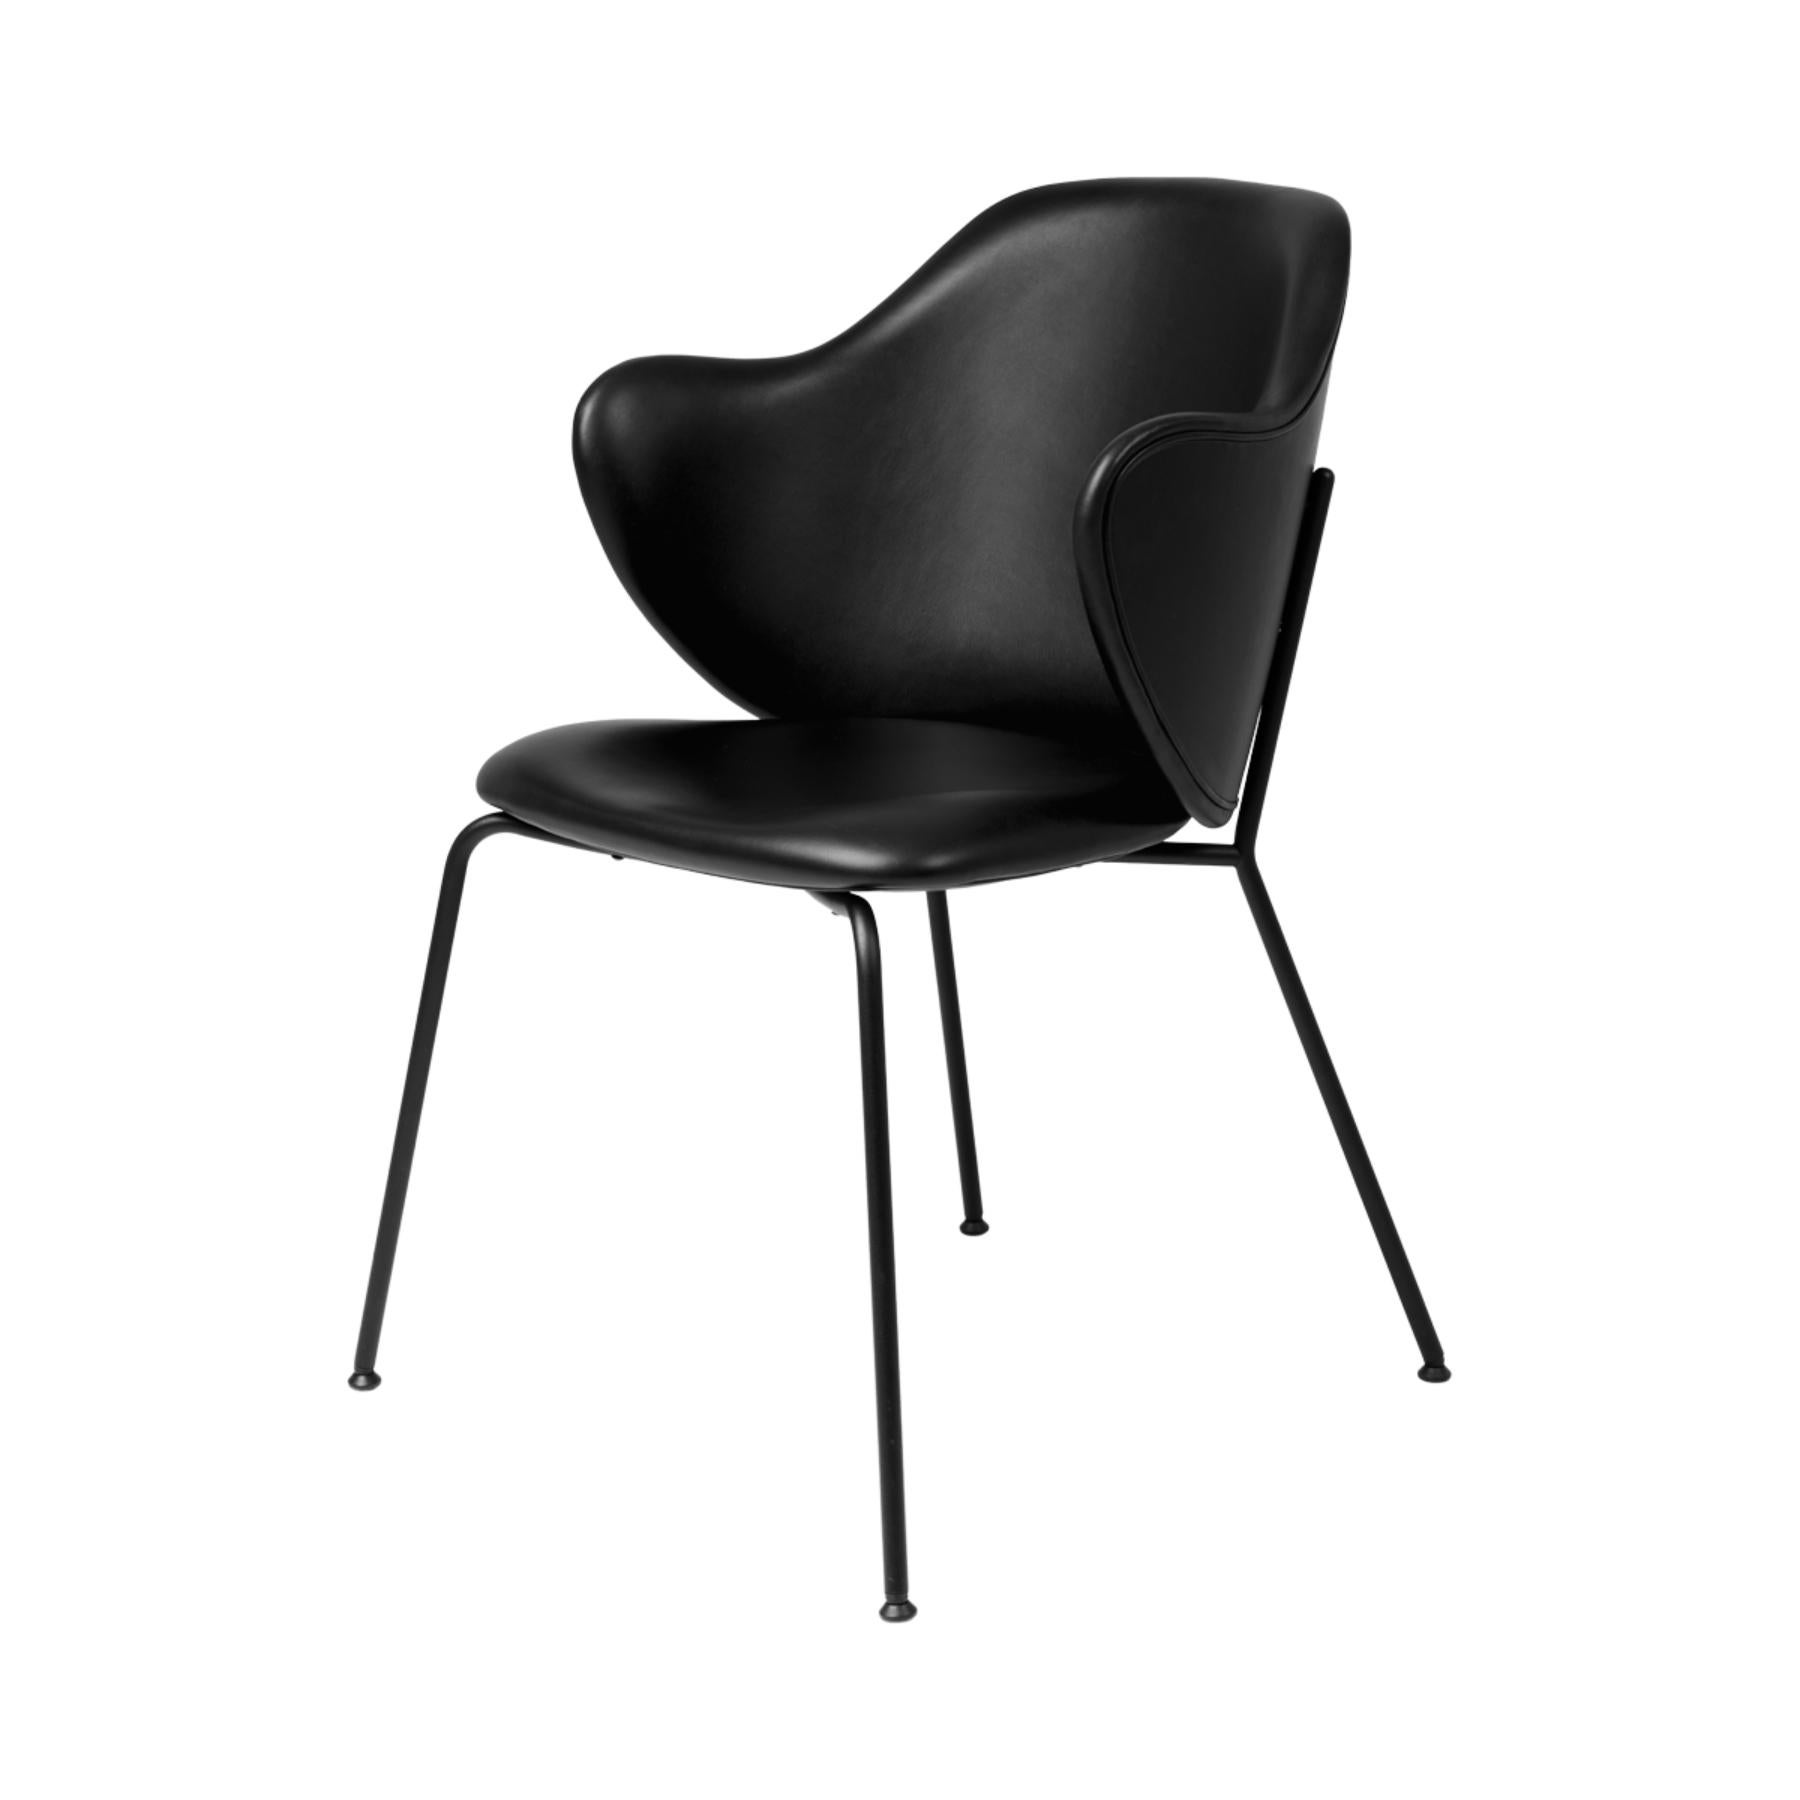 Black leather lassen chair by Lassen
Dimensions: W 58 x D 60 x H 88 cm 
Materials: Leather

The Lassen chair by Flemming Lassen, Magnus Sangild and Marianne Viktor was launched in 2018 as an ode to Flemming Lassen’s uncompromising approach and